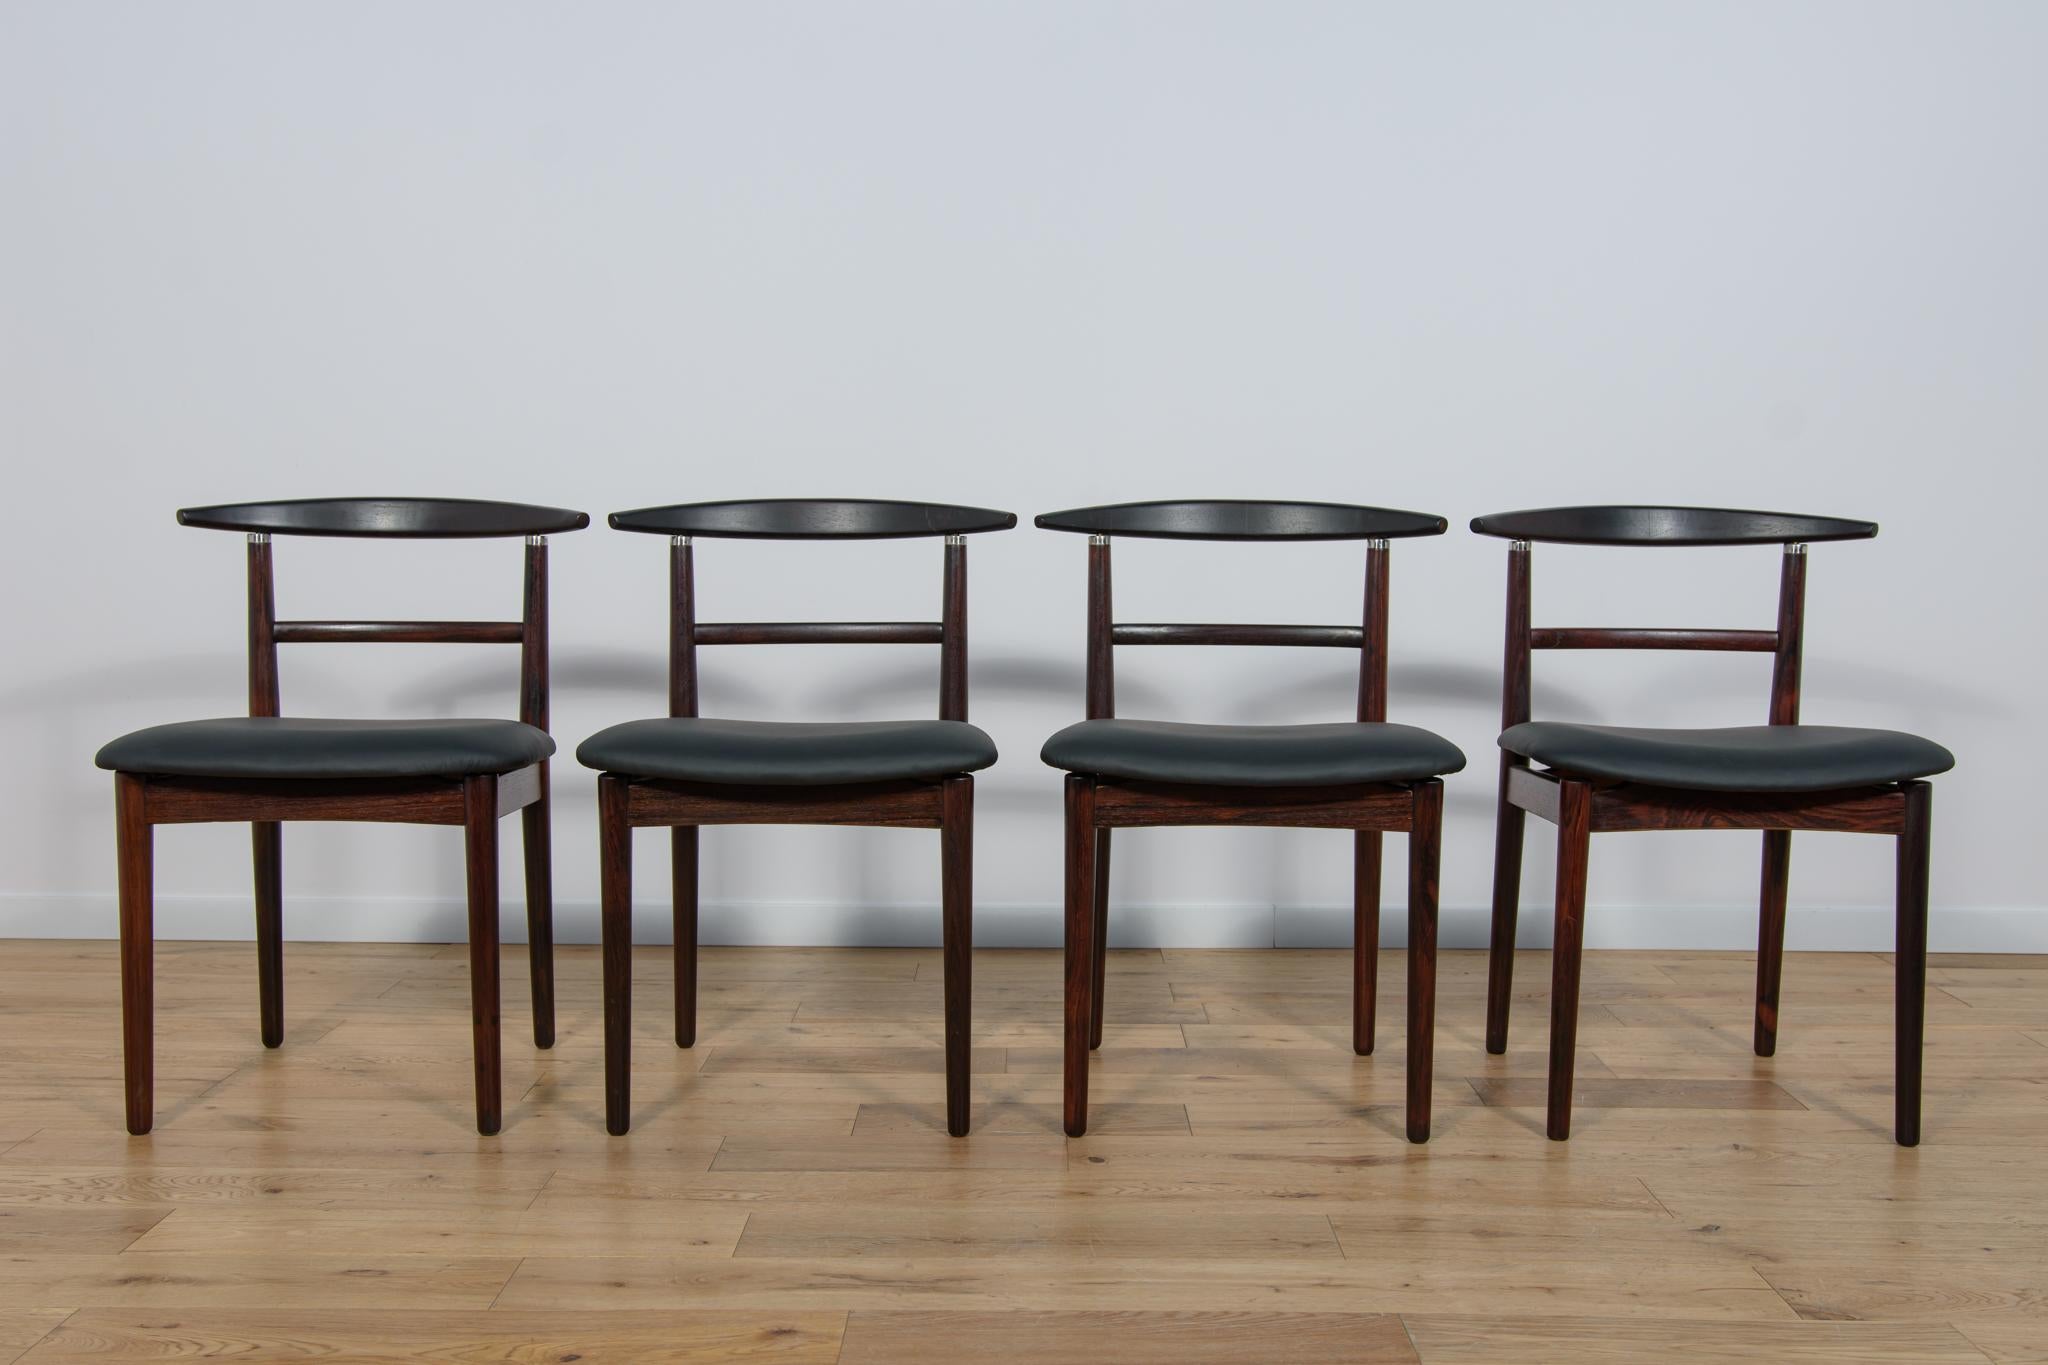 Mid-Century Modern Rosewood Dining Chairs by Helge Sibast & Børge Rammerskov, Denmark, 1960s. For Sale